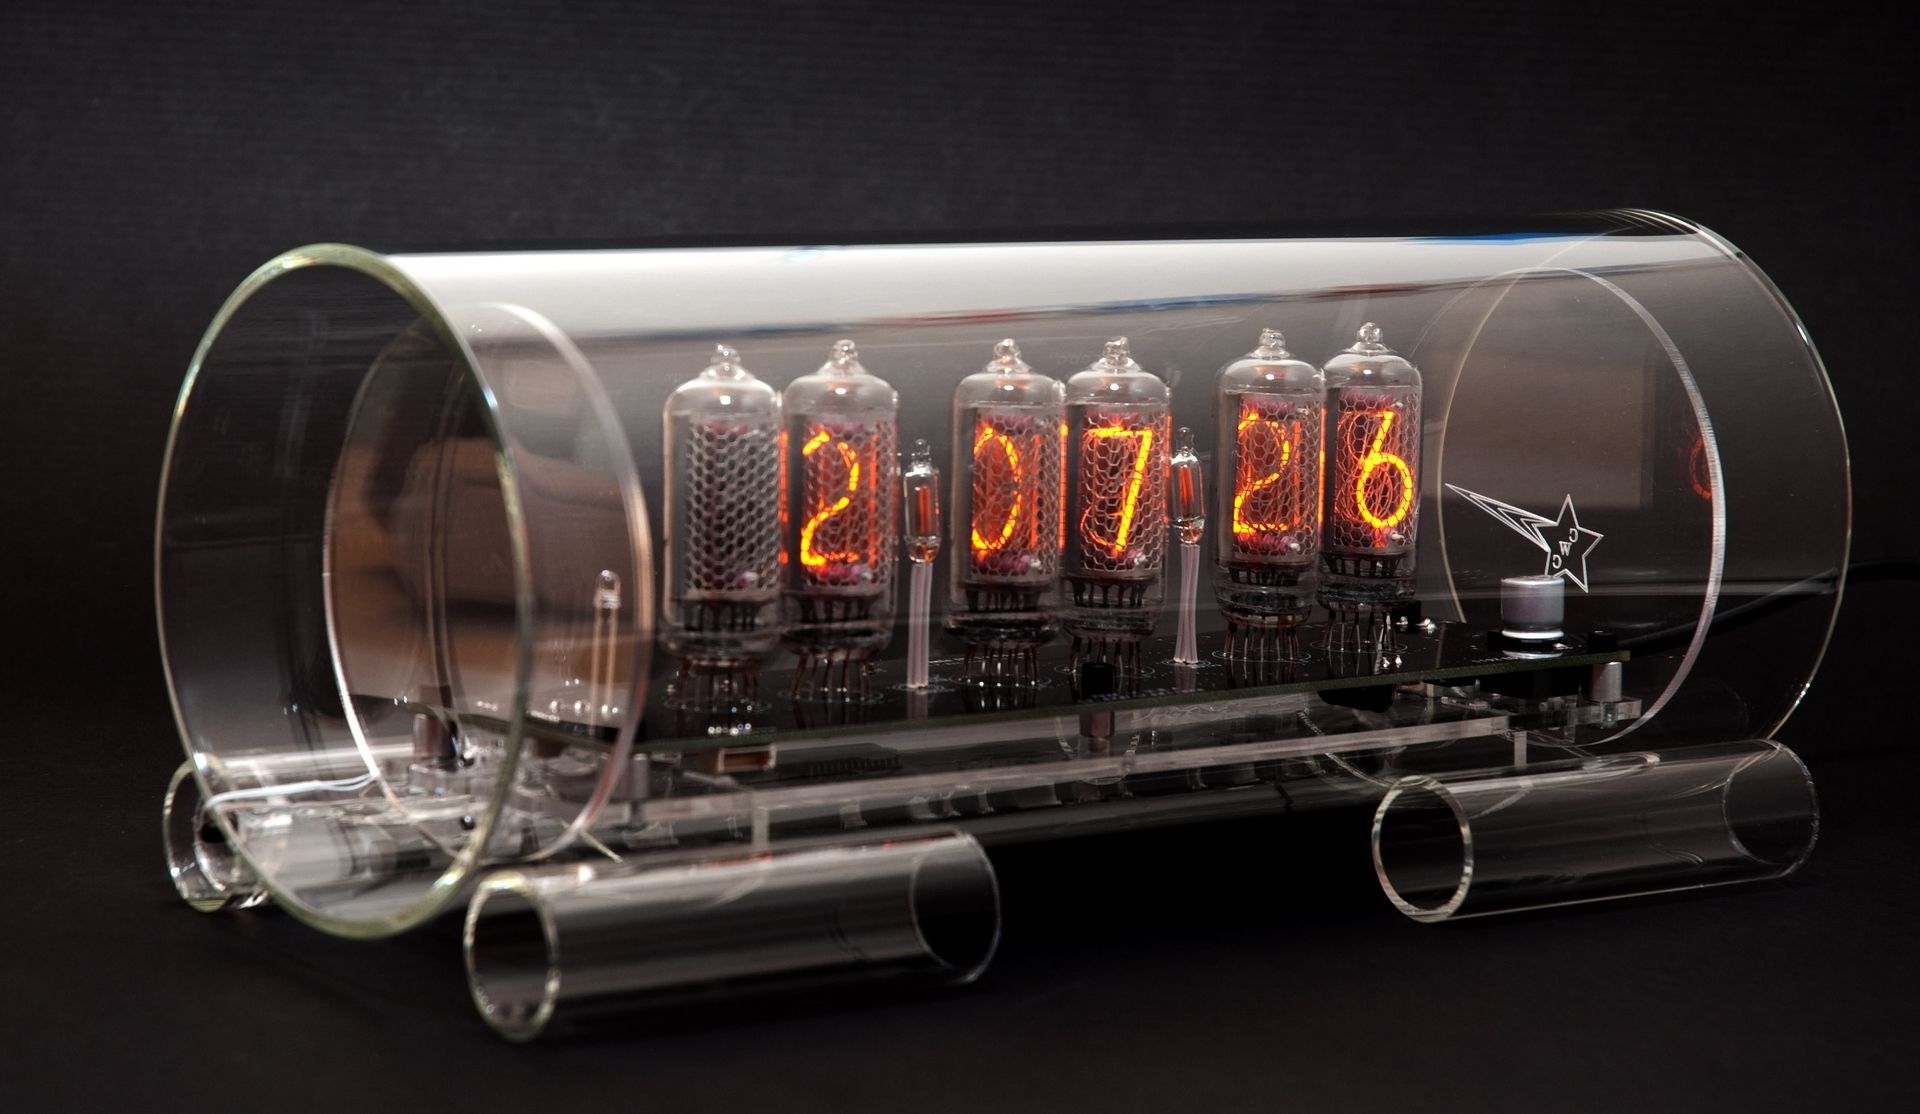 ZM1042 Glass Column with 2 NE-2H neon lamps and HOLDER for Nixie clock on IN-18 